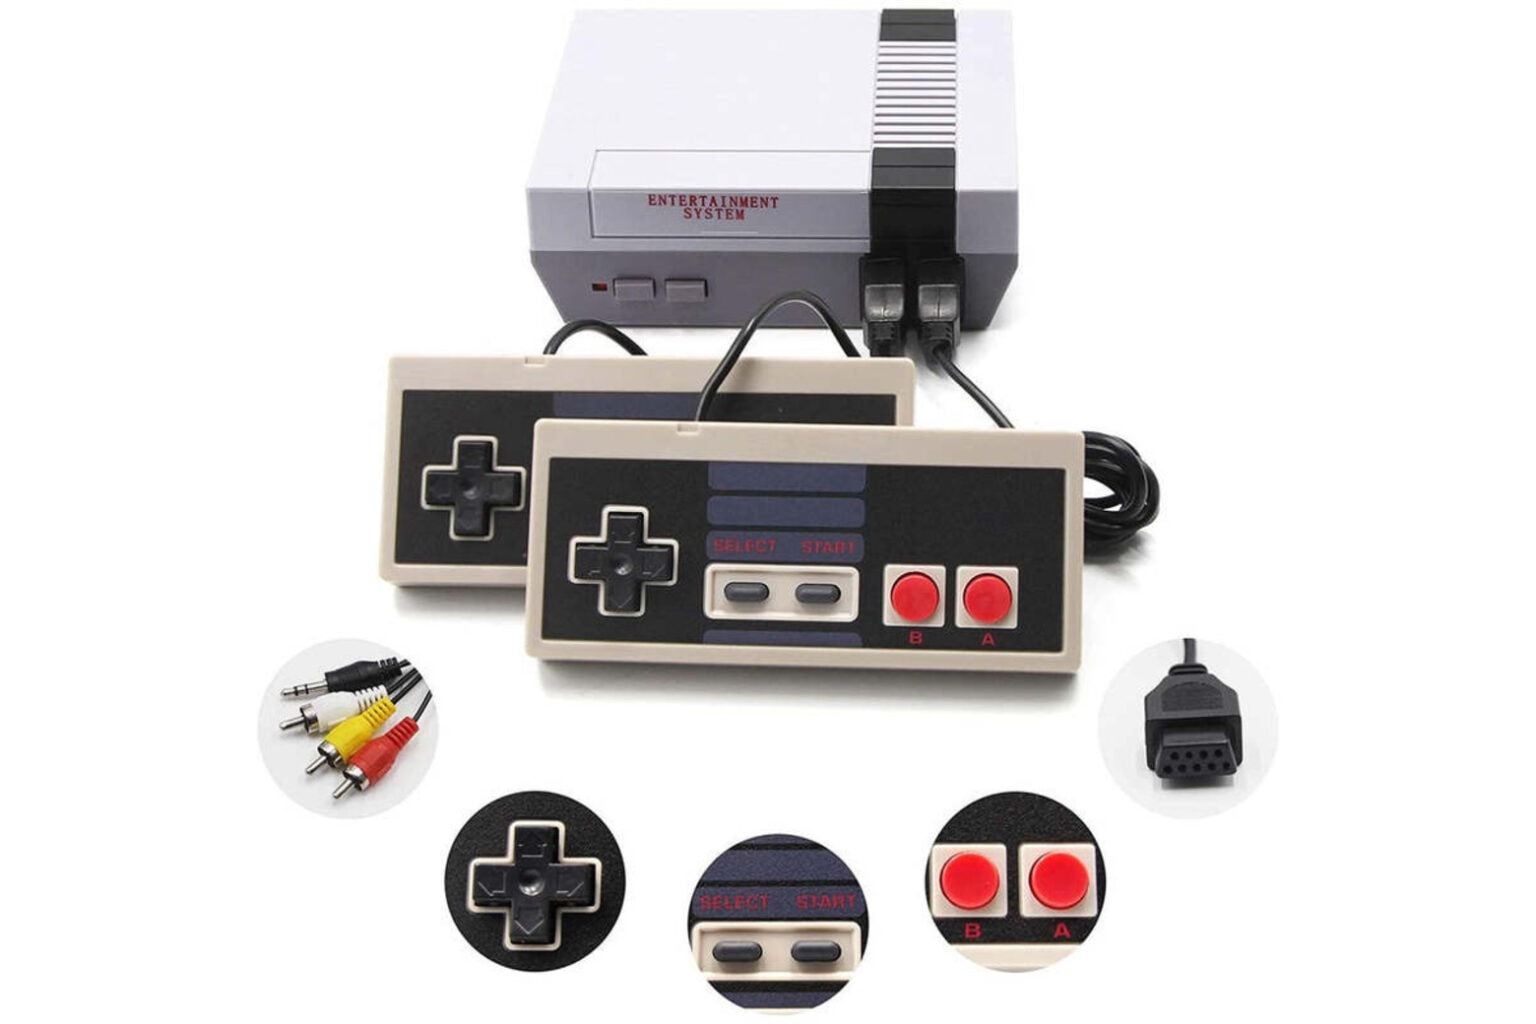 Travel back in time with a $25 gaming console and 620+ vintage games.